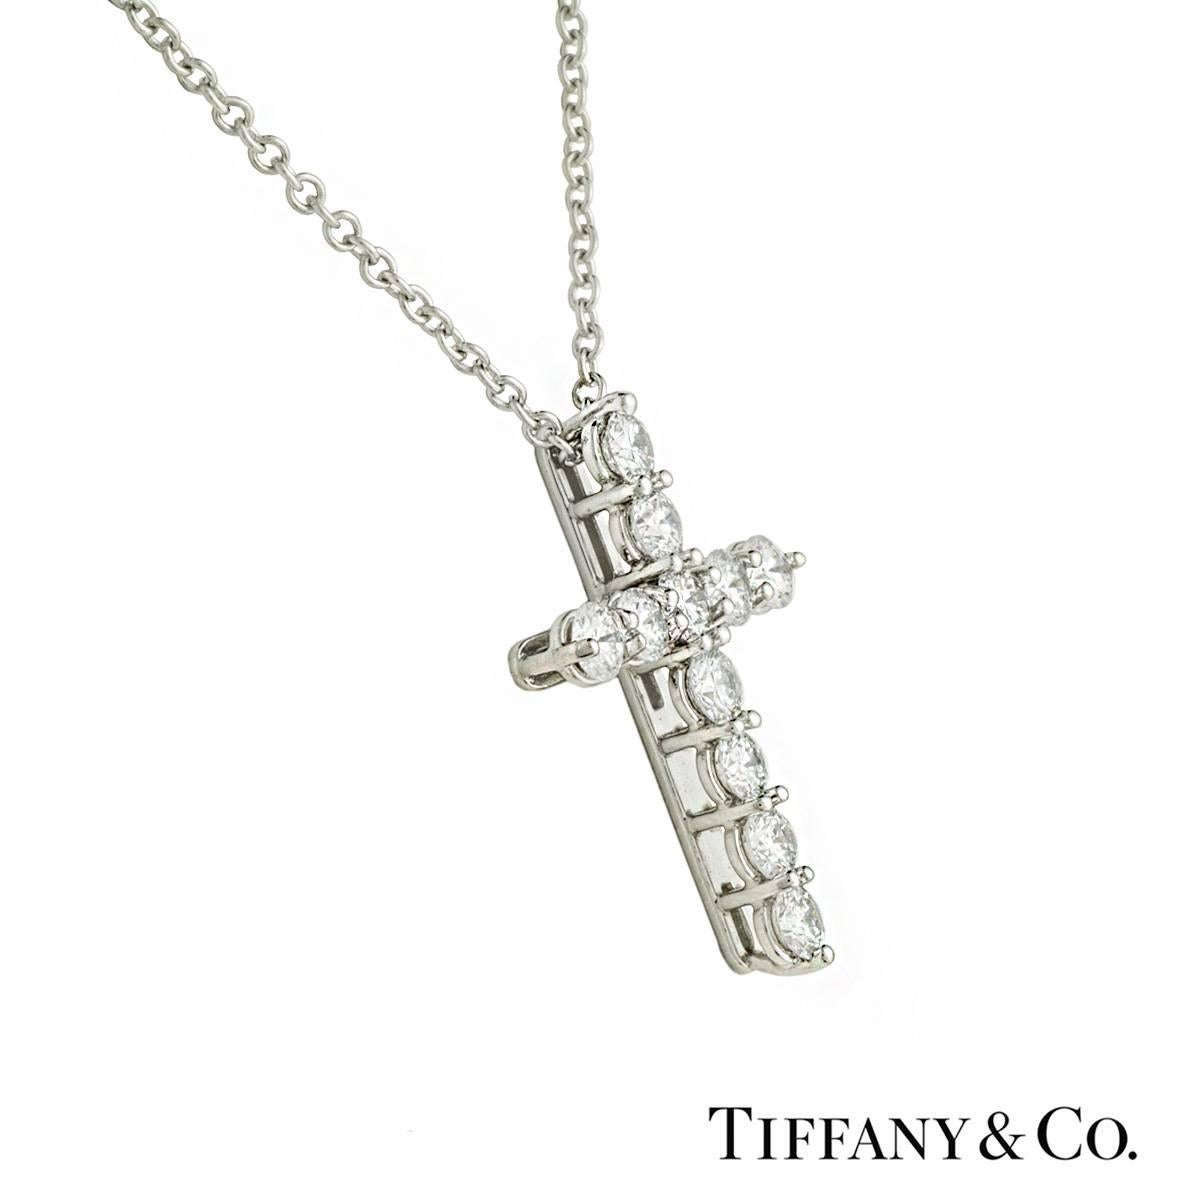 A beautiful diamond set cross pendant in platinum by Tiffany & Co. The cross is set with 11 round brilliant cut claw set diamonds totalling approximately 0.45ct. The pendant measures 1.3cm X 1.8cm and comes on an original 16 inch Tiffany &